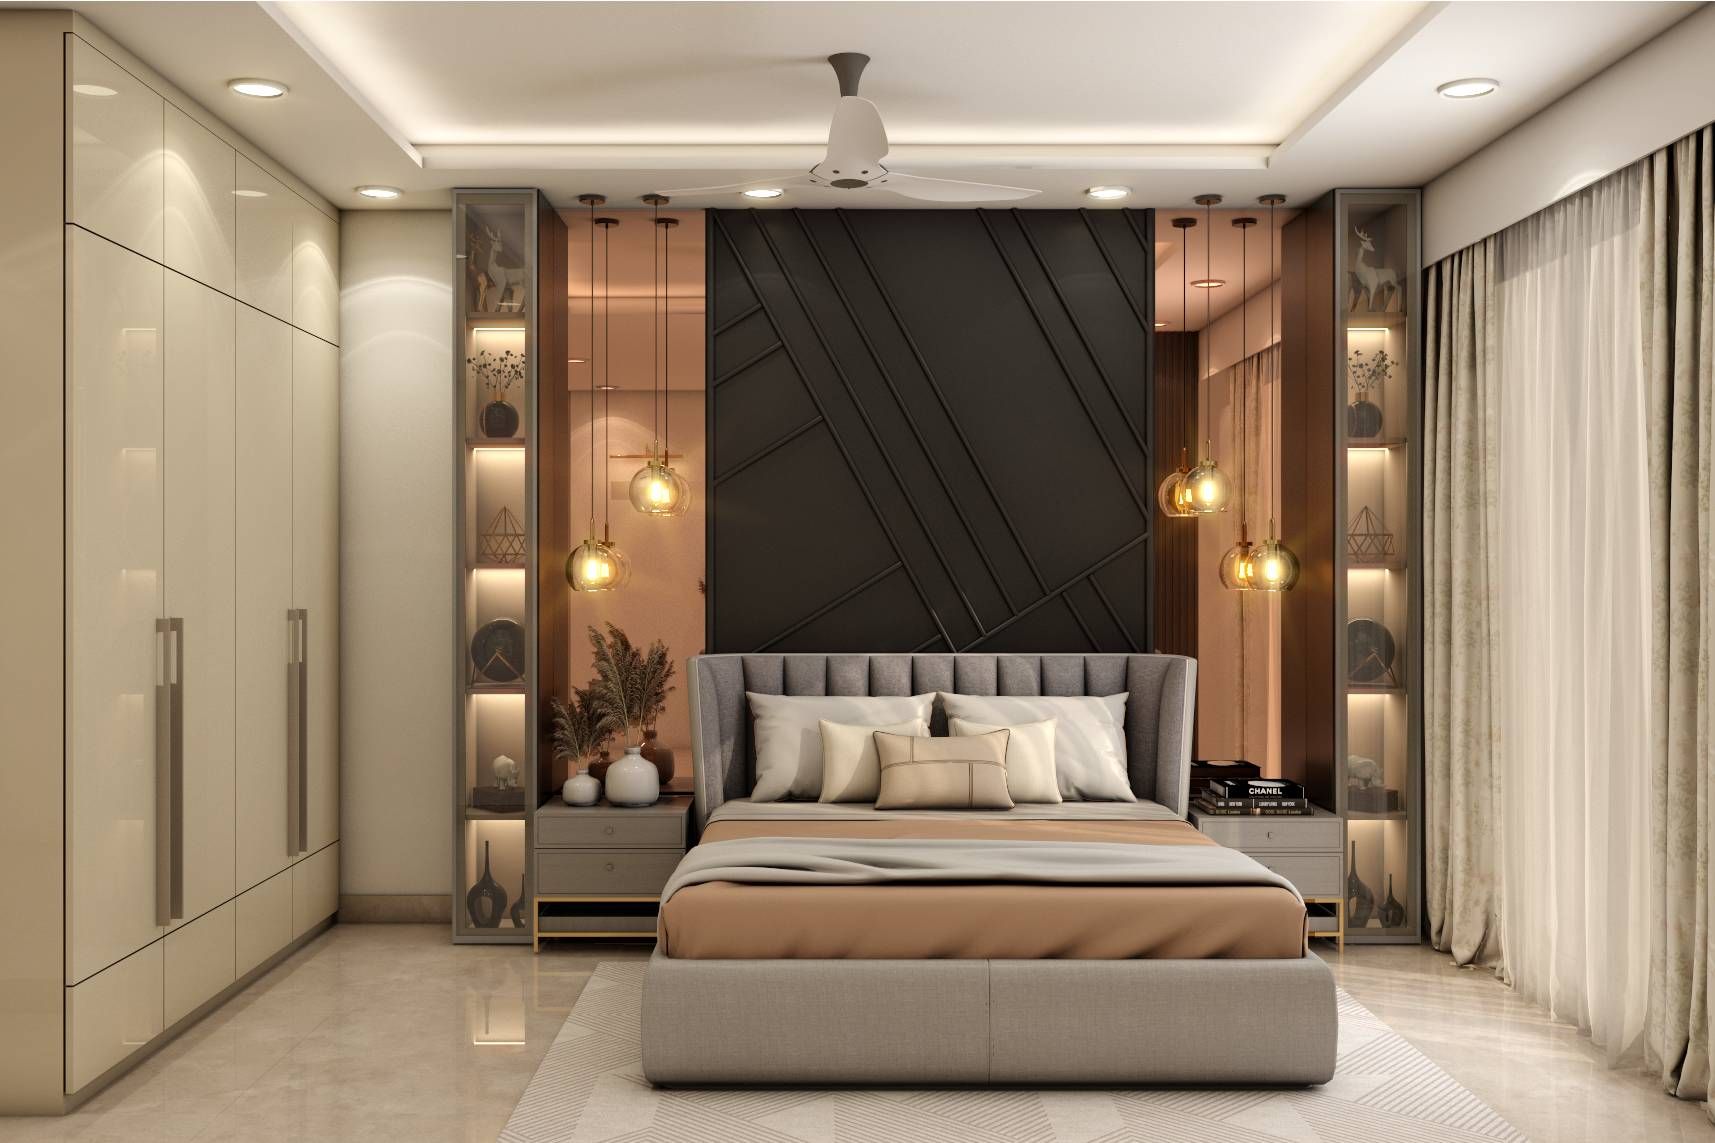 Modern Master Bedroom Design With Black Accent Wall